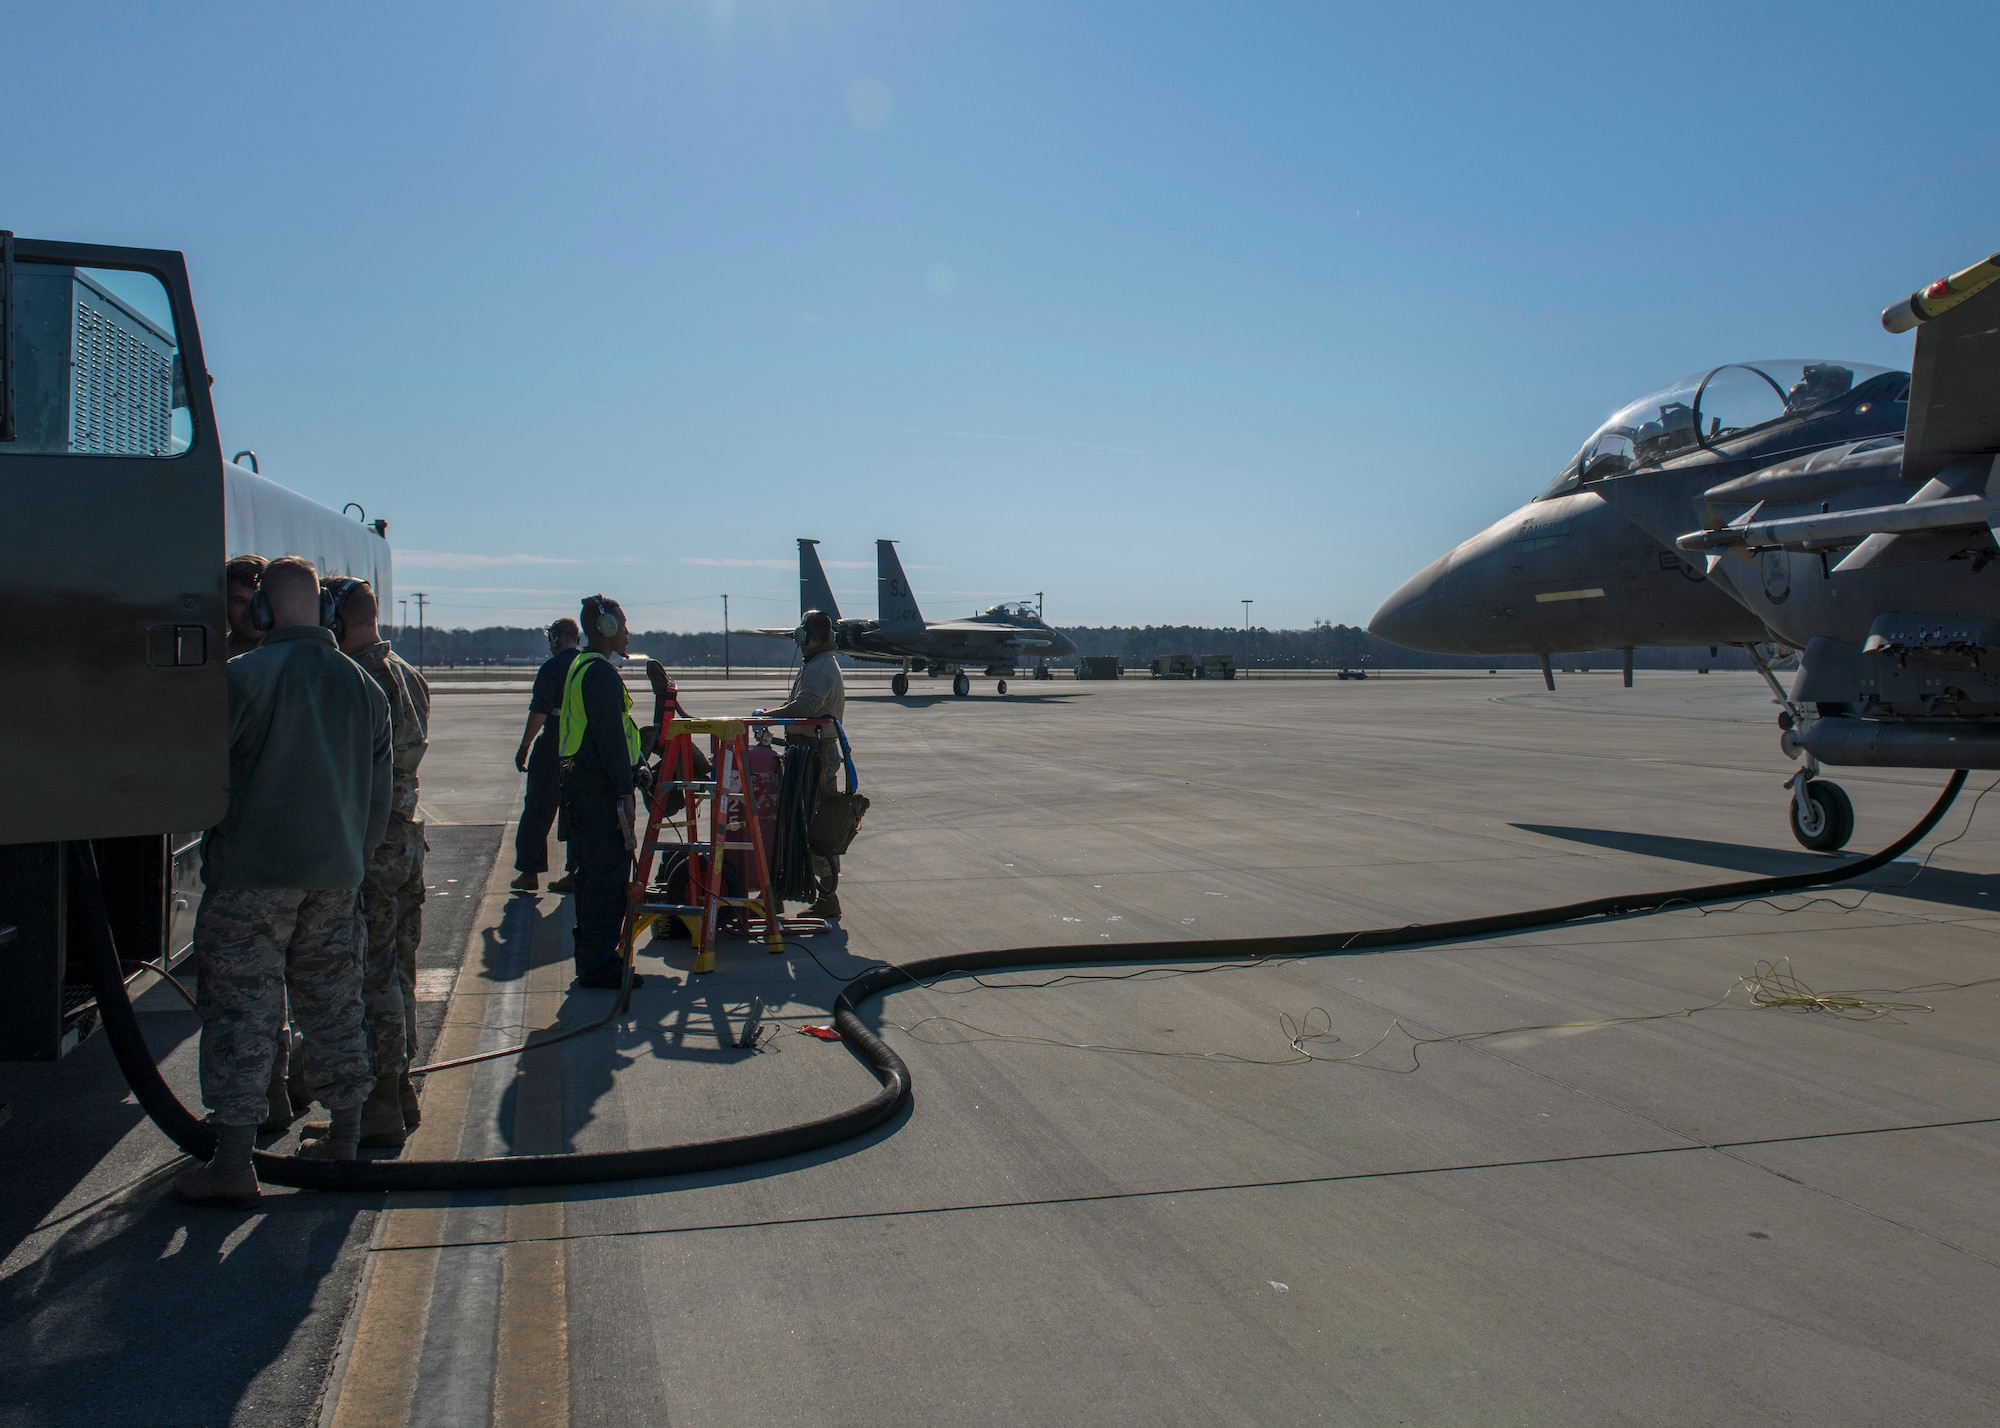 Airmen from the 4th Logistics Readiness Squadron execute a hot-pit refueling on an F-15E Strike Eagle.